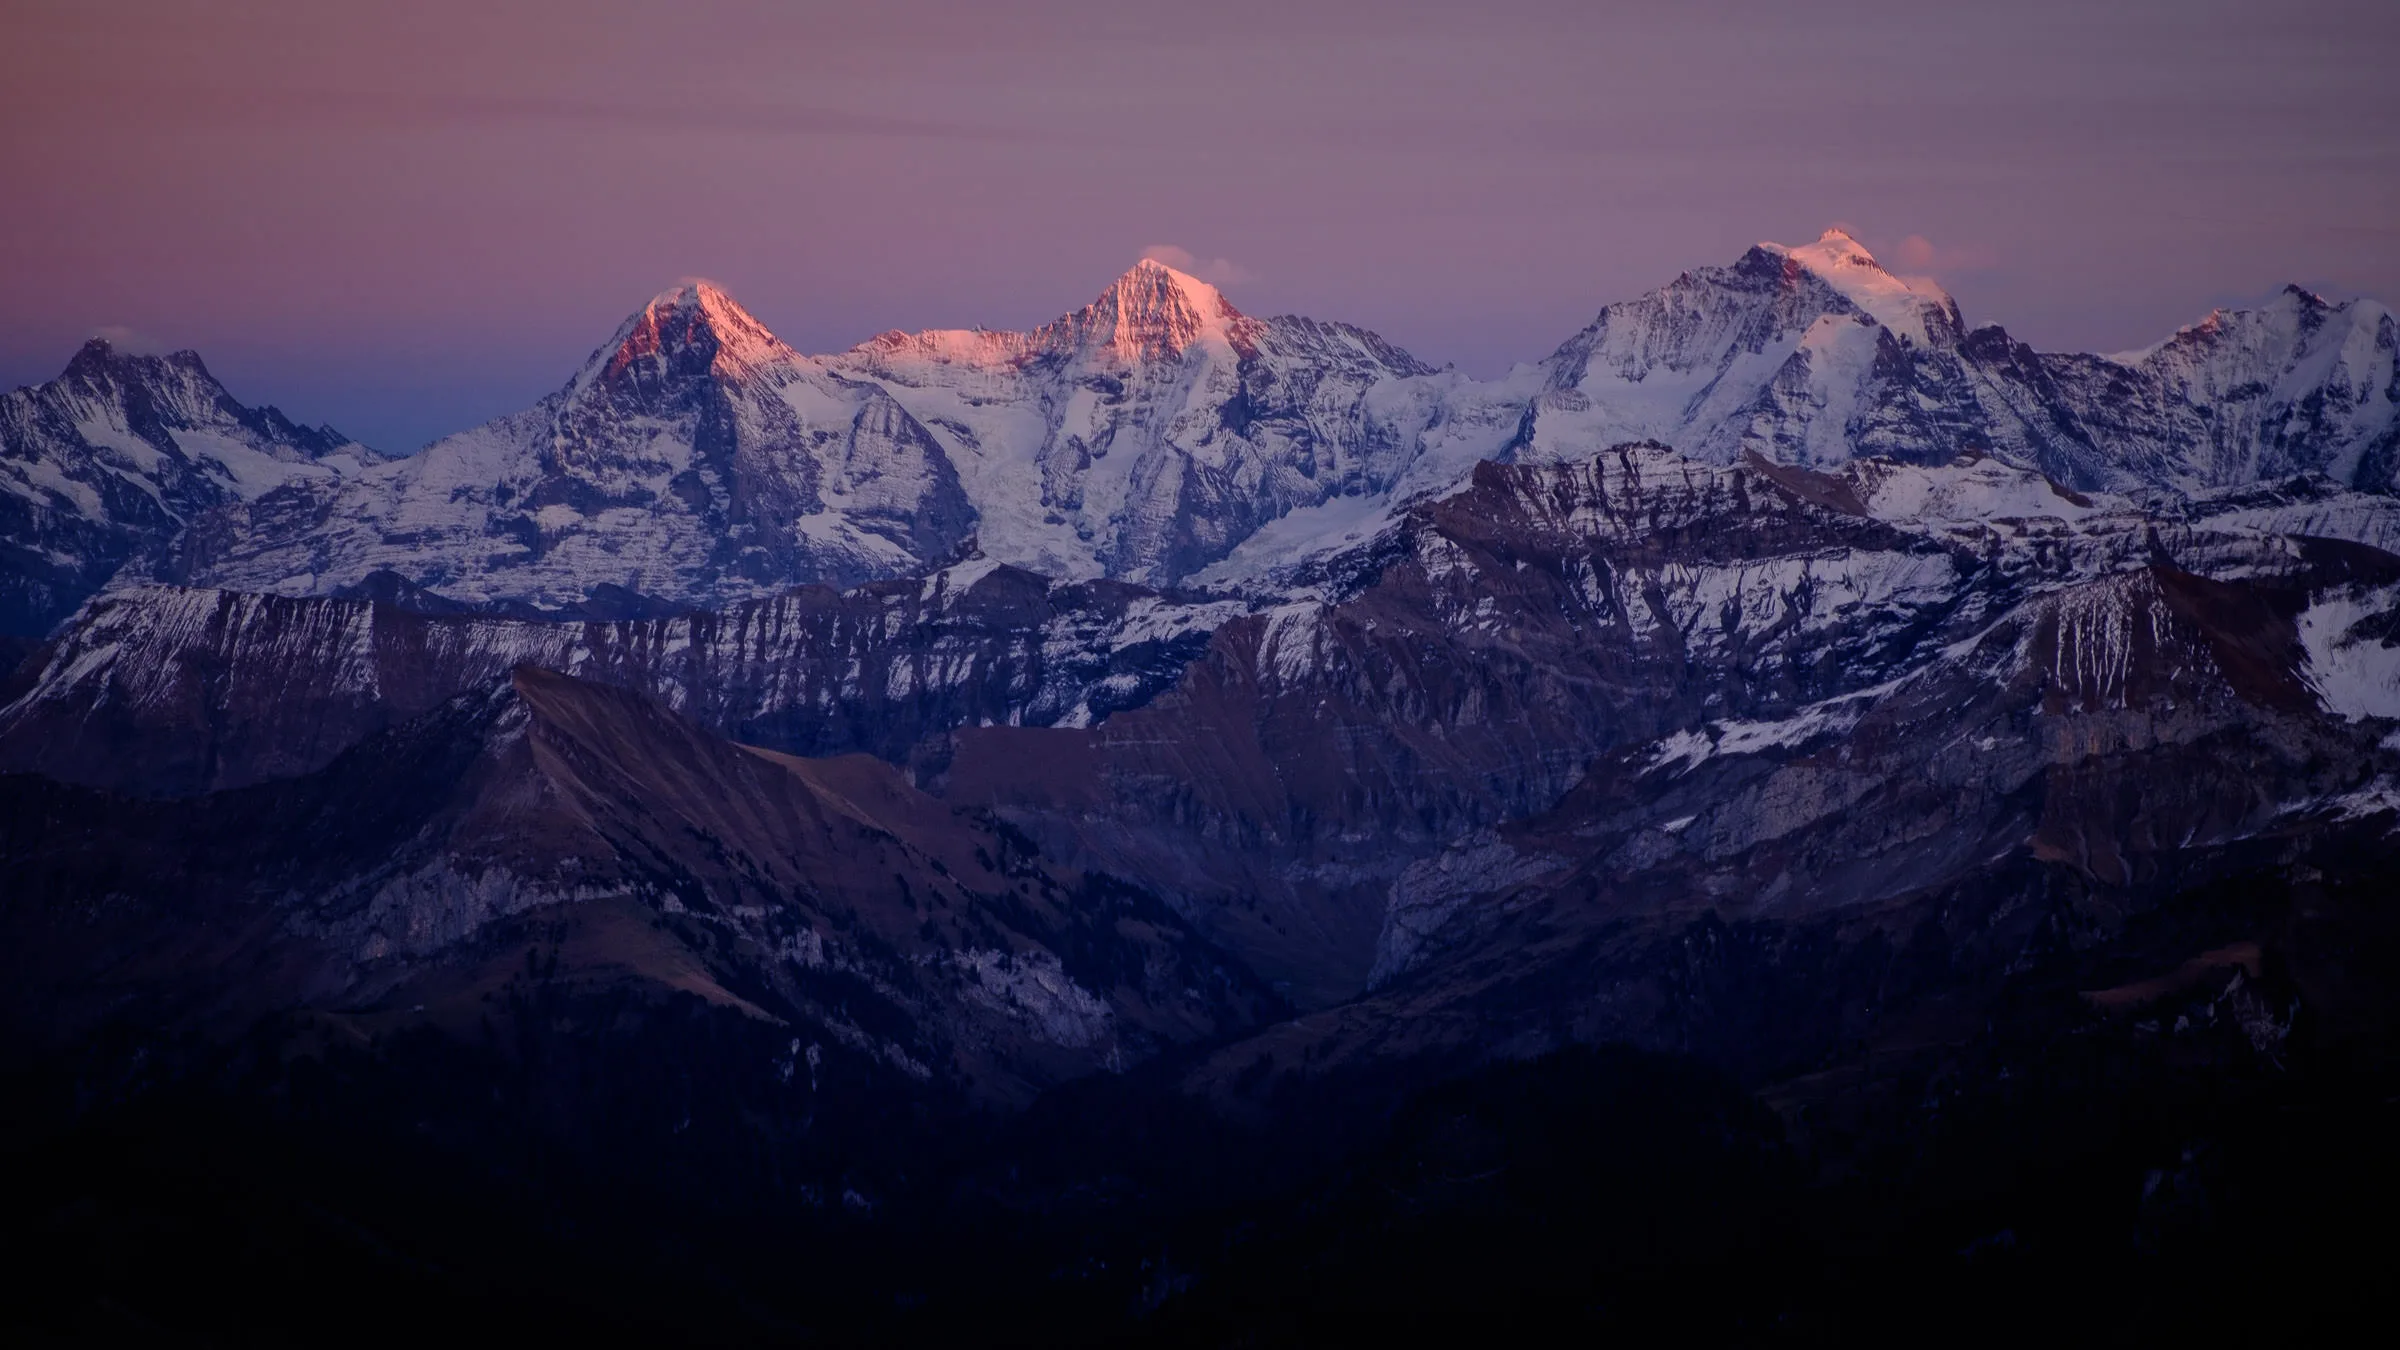 Evening light on the Eiger, Mönch and Jungfrau